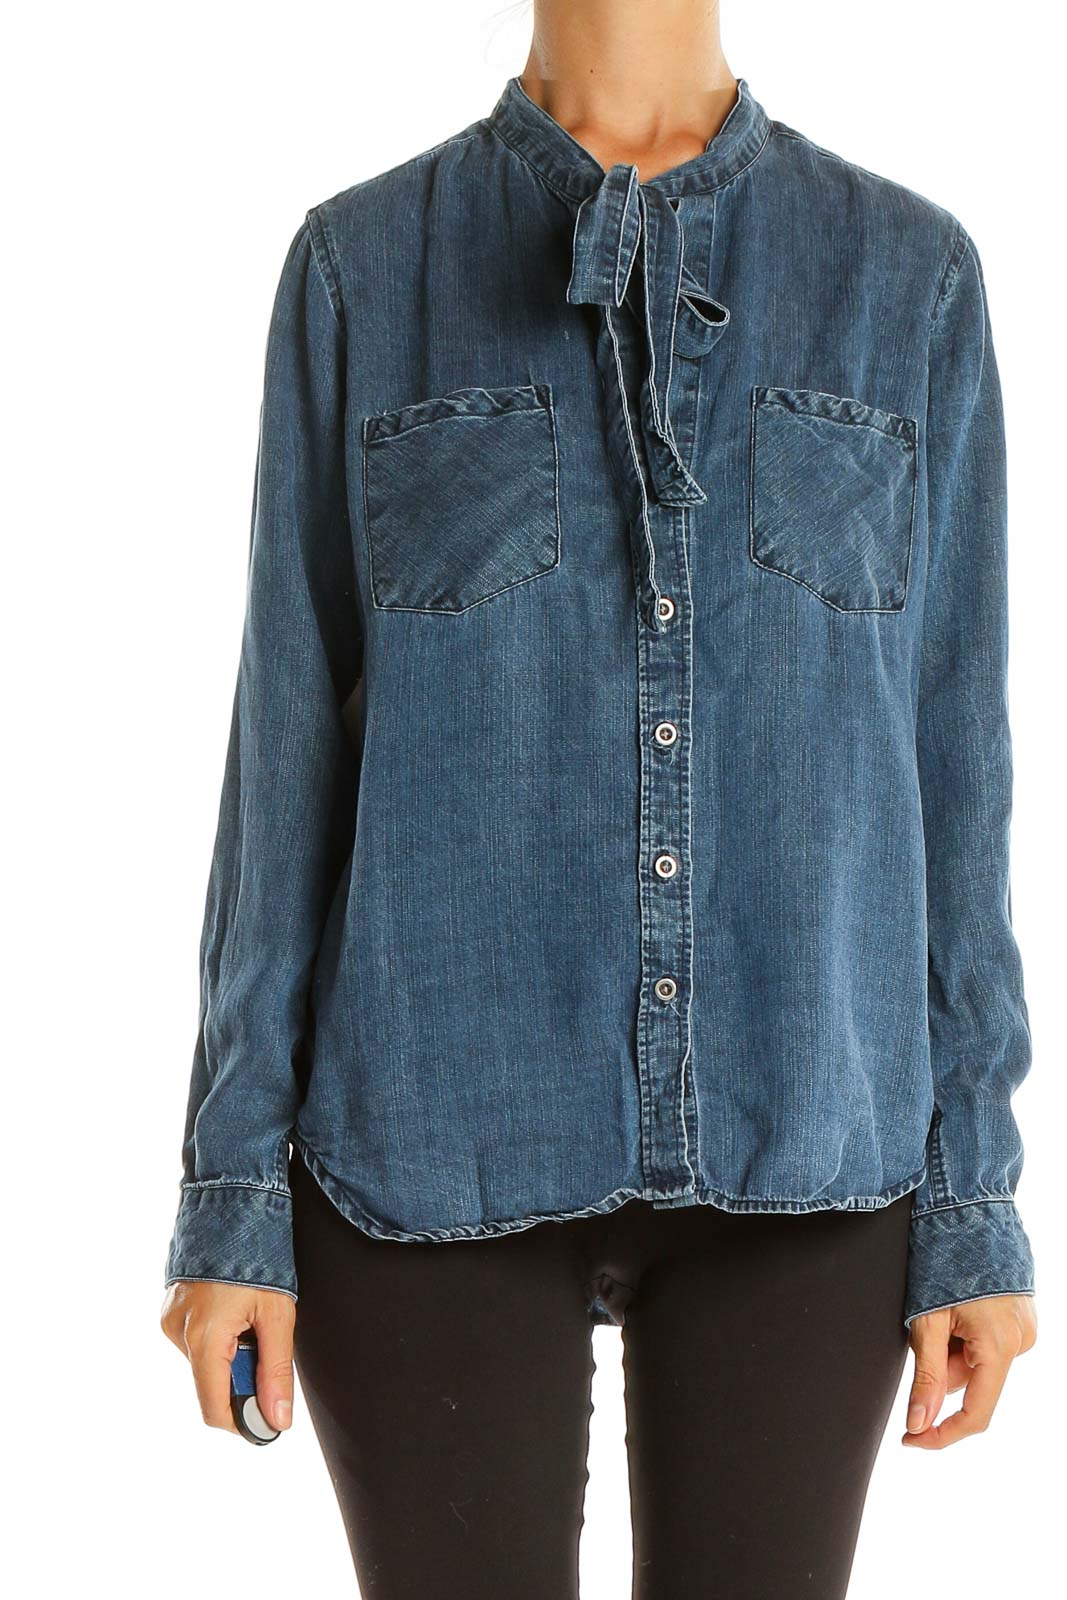 Blue Chambray All Day Wear Top Front